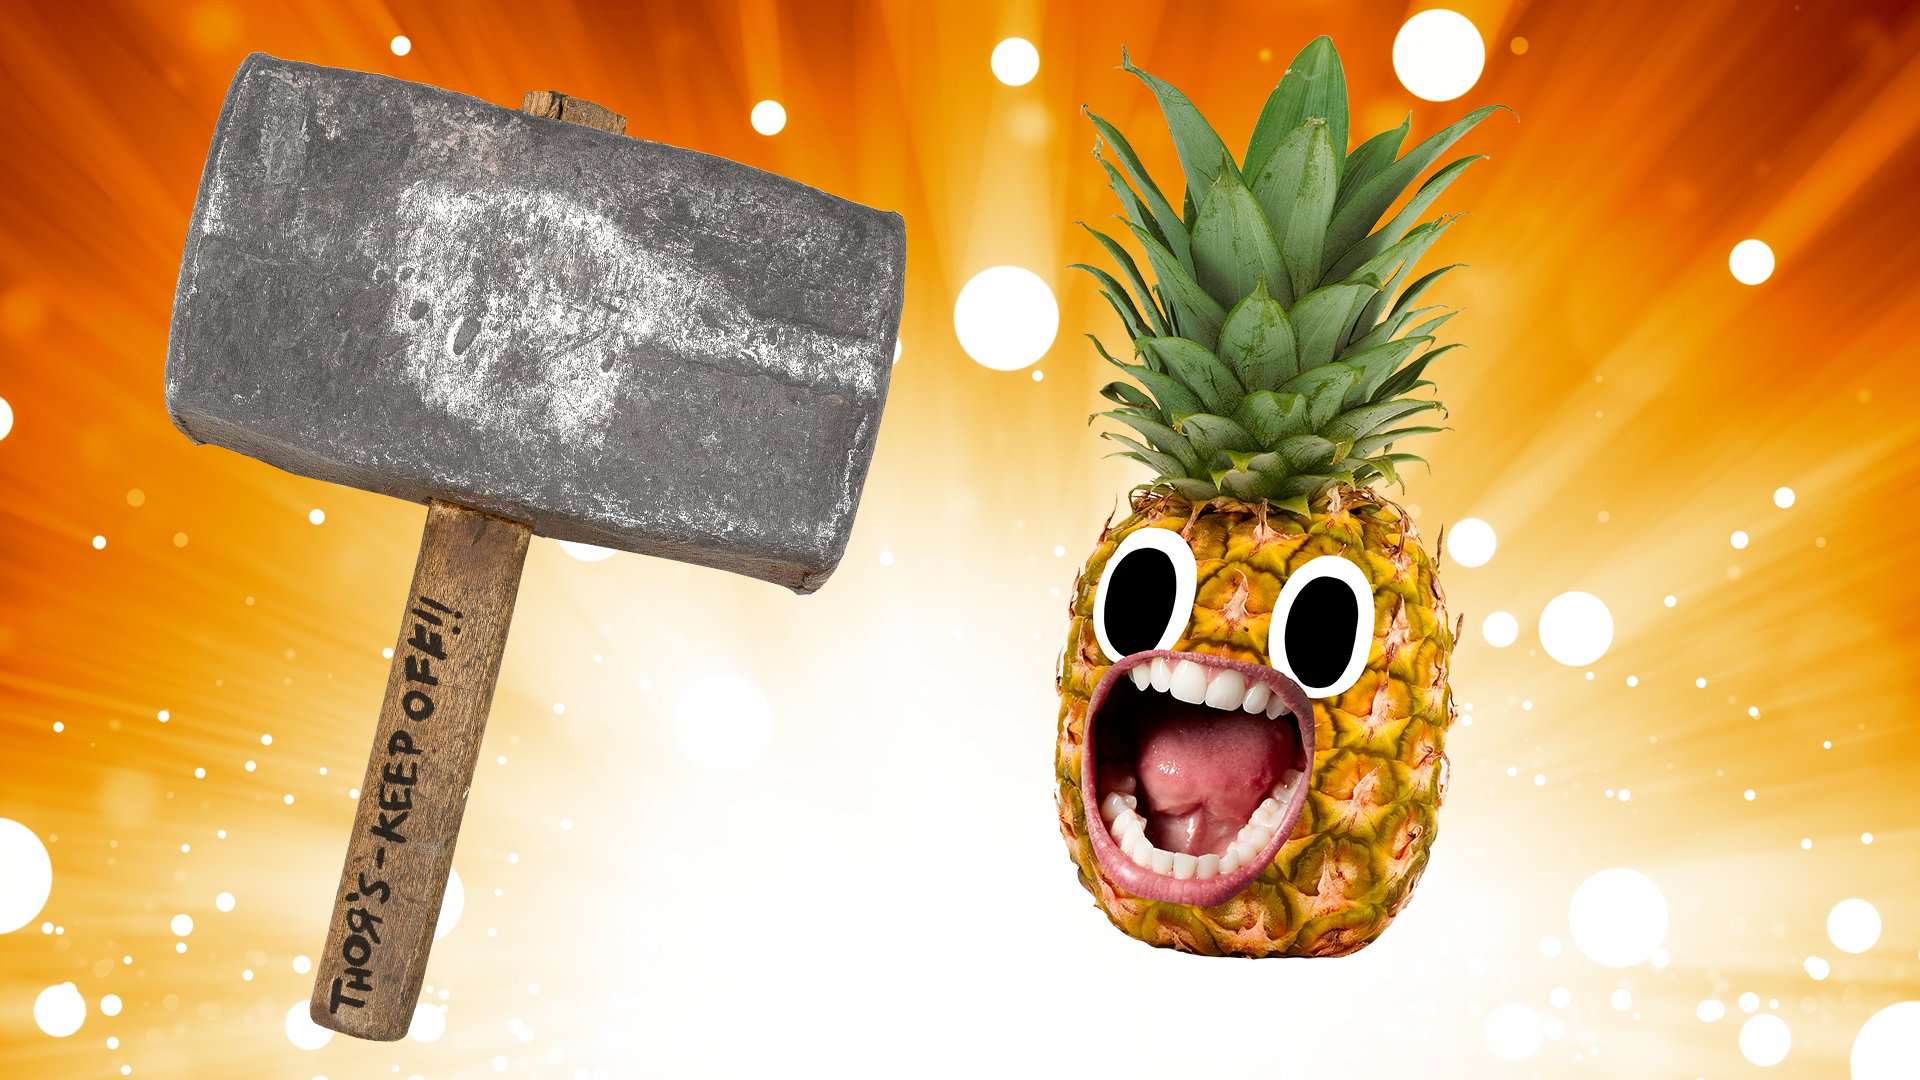 Thor's hammer and screaming pineapple on sparkle background